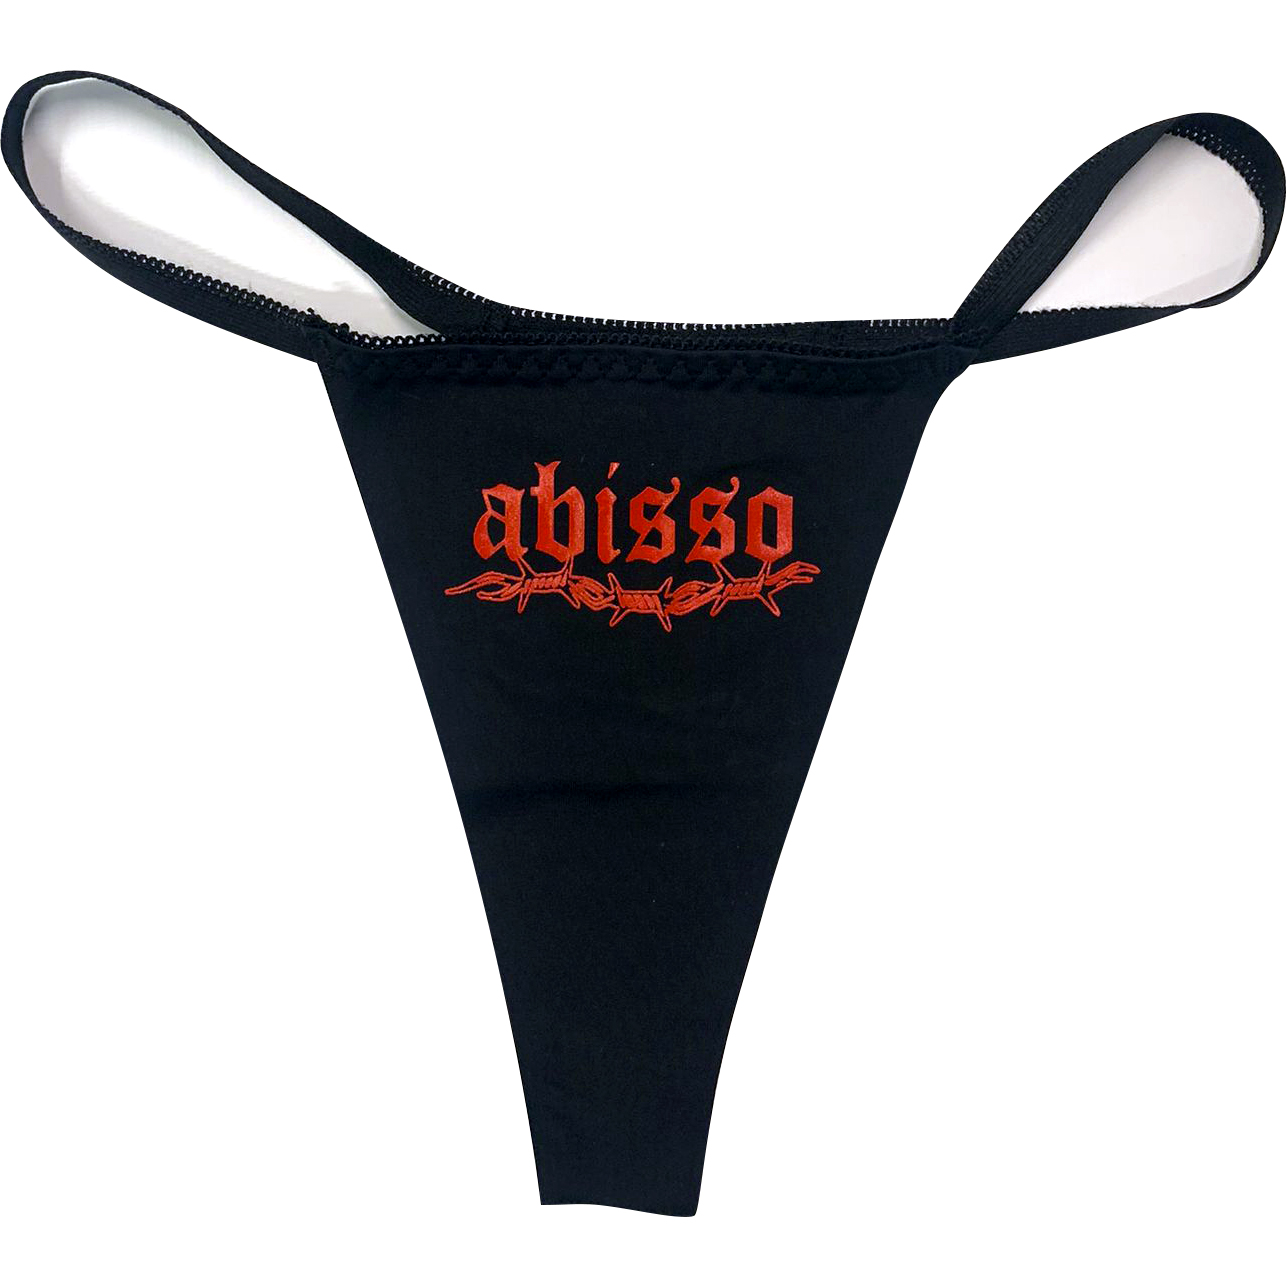 Abisso Thong